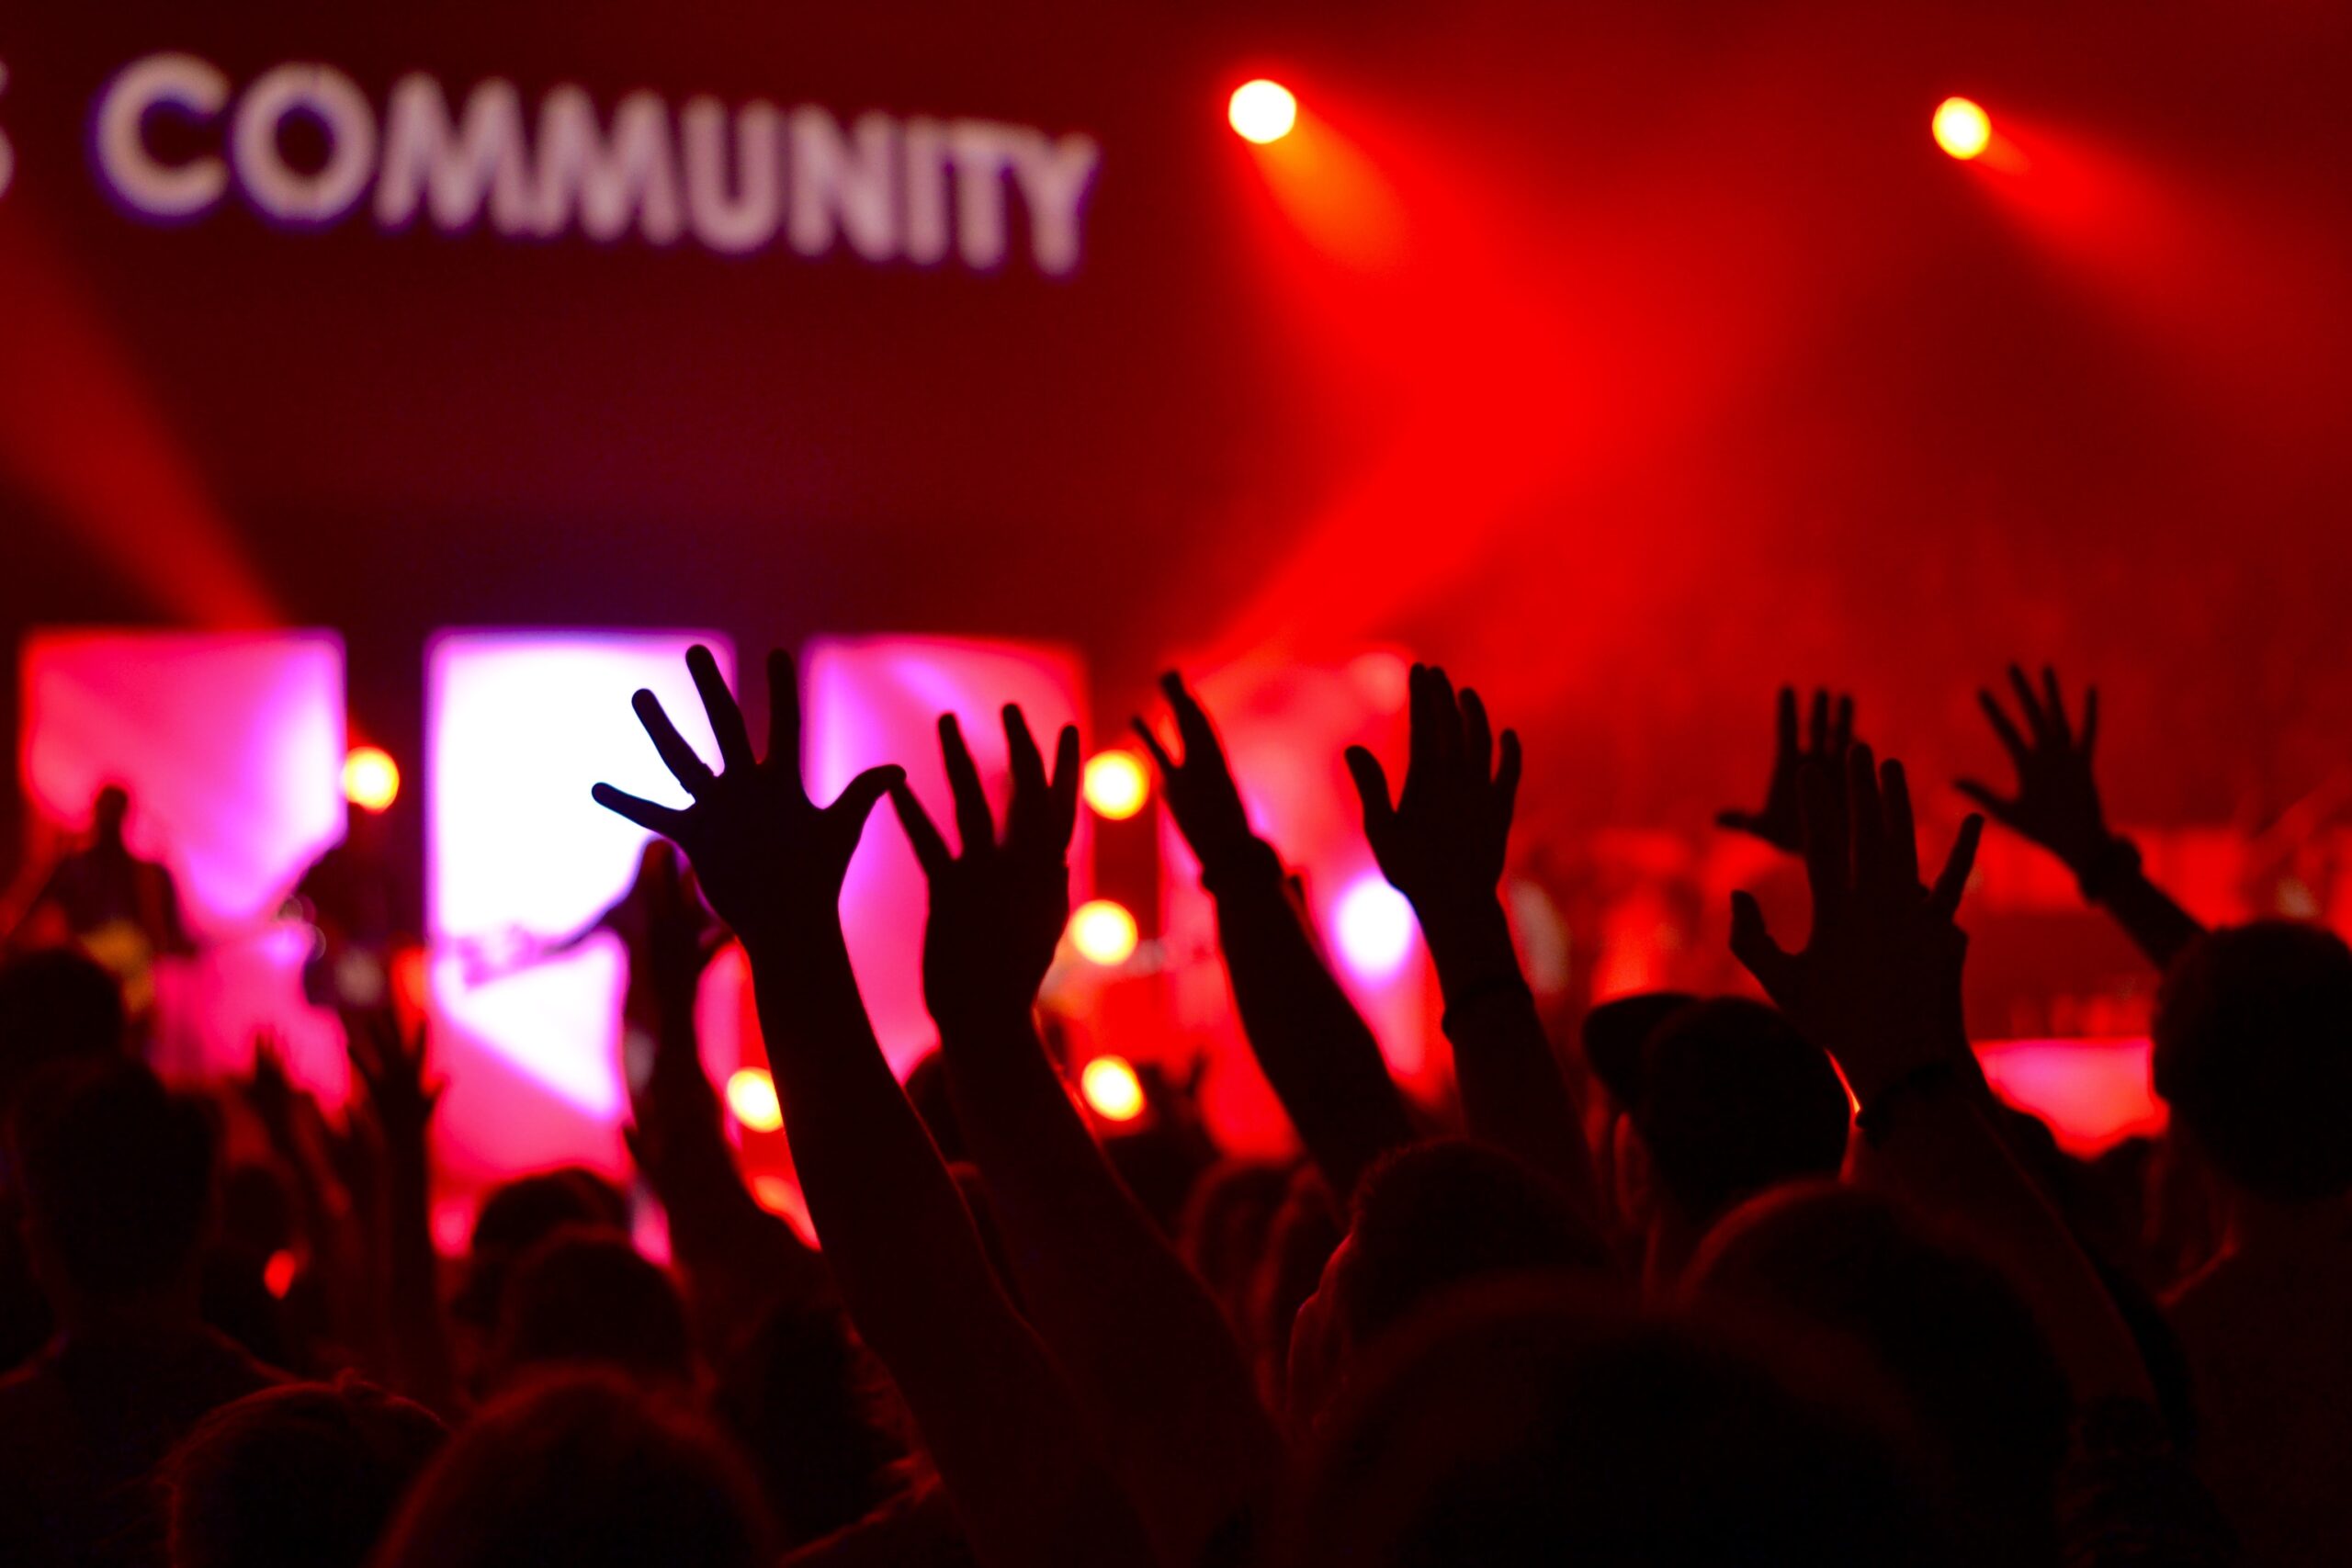 How to Build a Community With Your Development